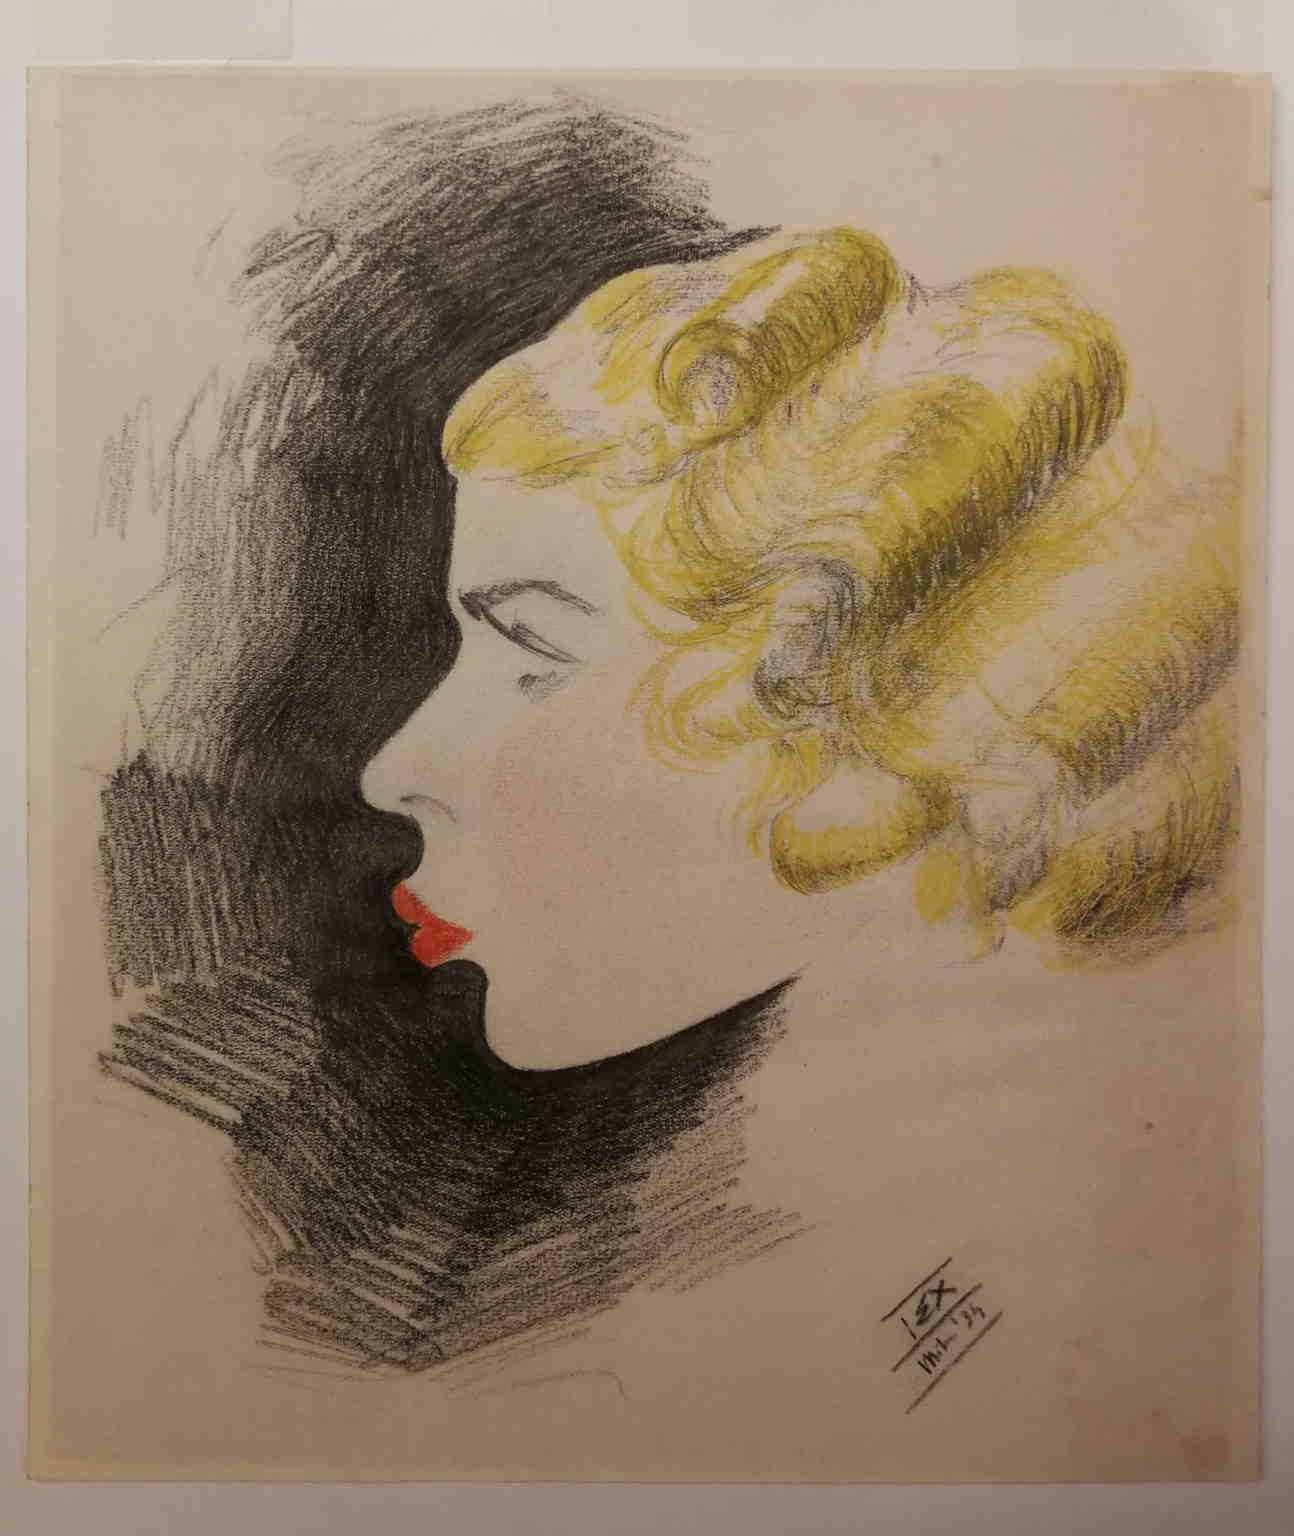 This drawing, color pencil on paper 26 x 23 cm without frame, portrays a lady on profile, styled as the typical fashion of the time. By the way she's portrayed, she seems an audacious, modern and bold woman, wearing hot red lipstick and having